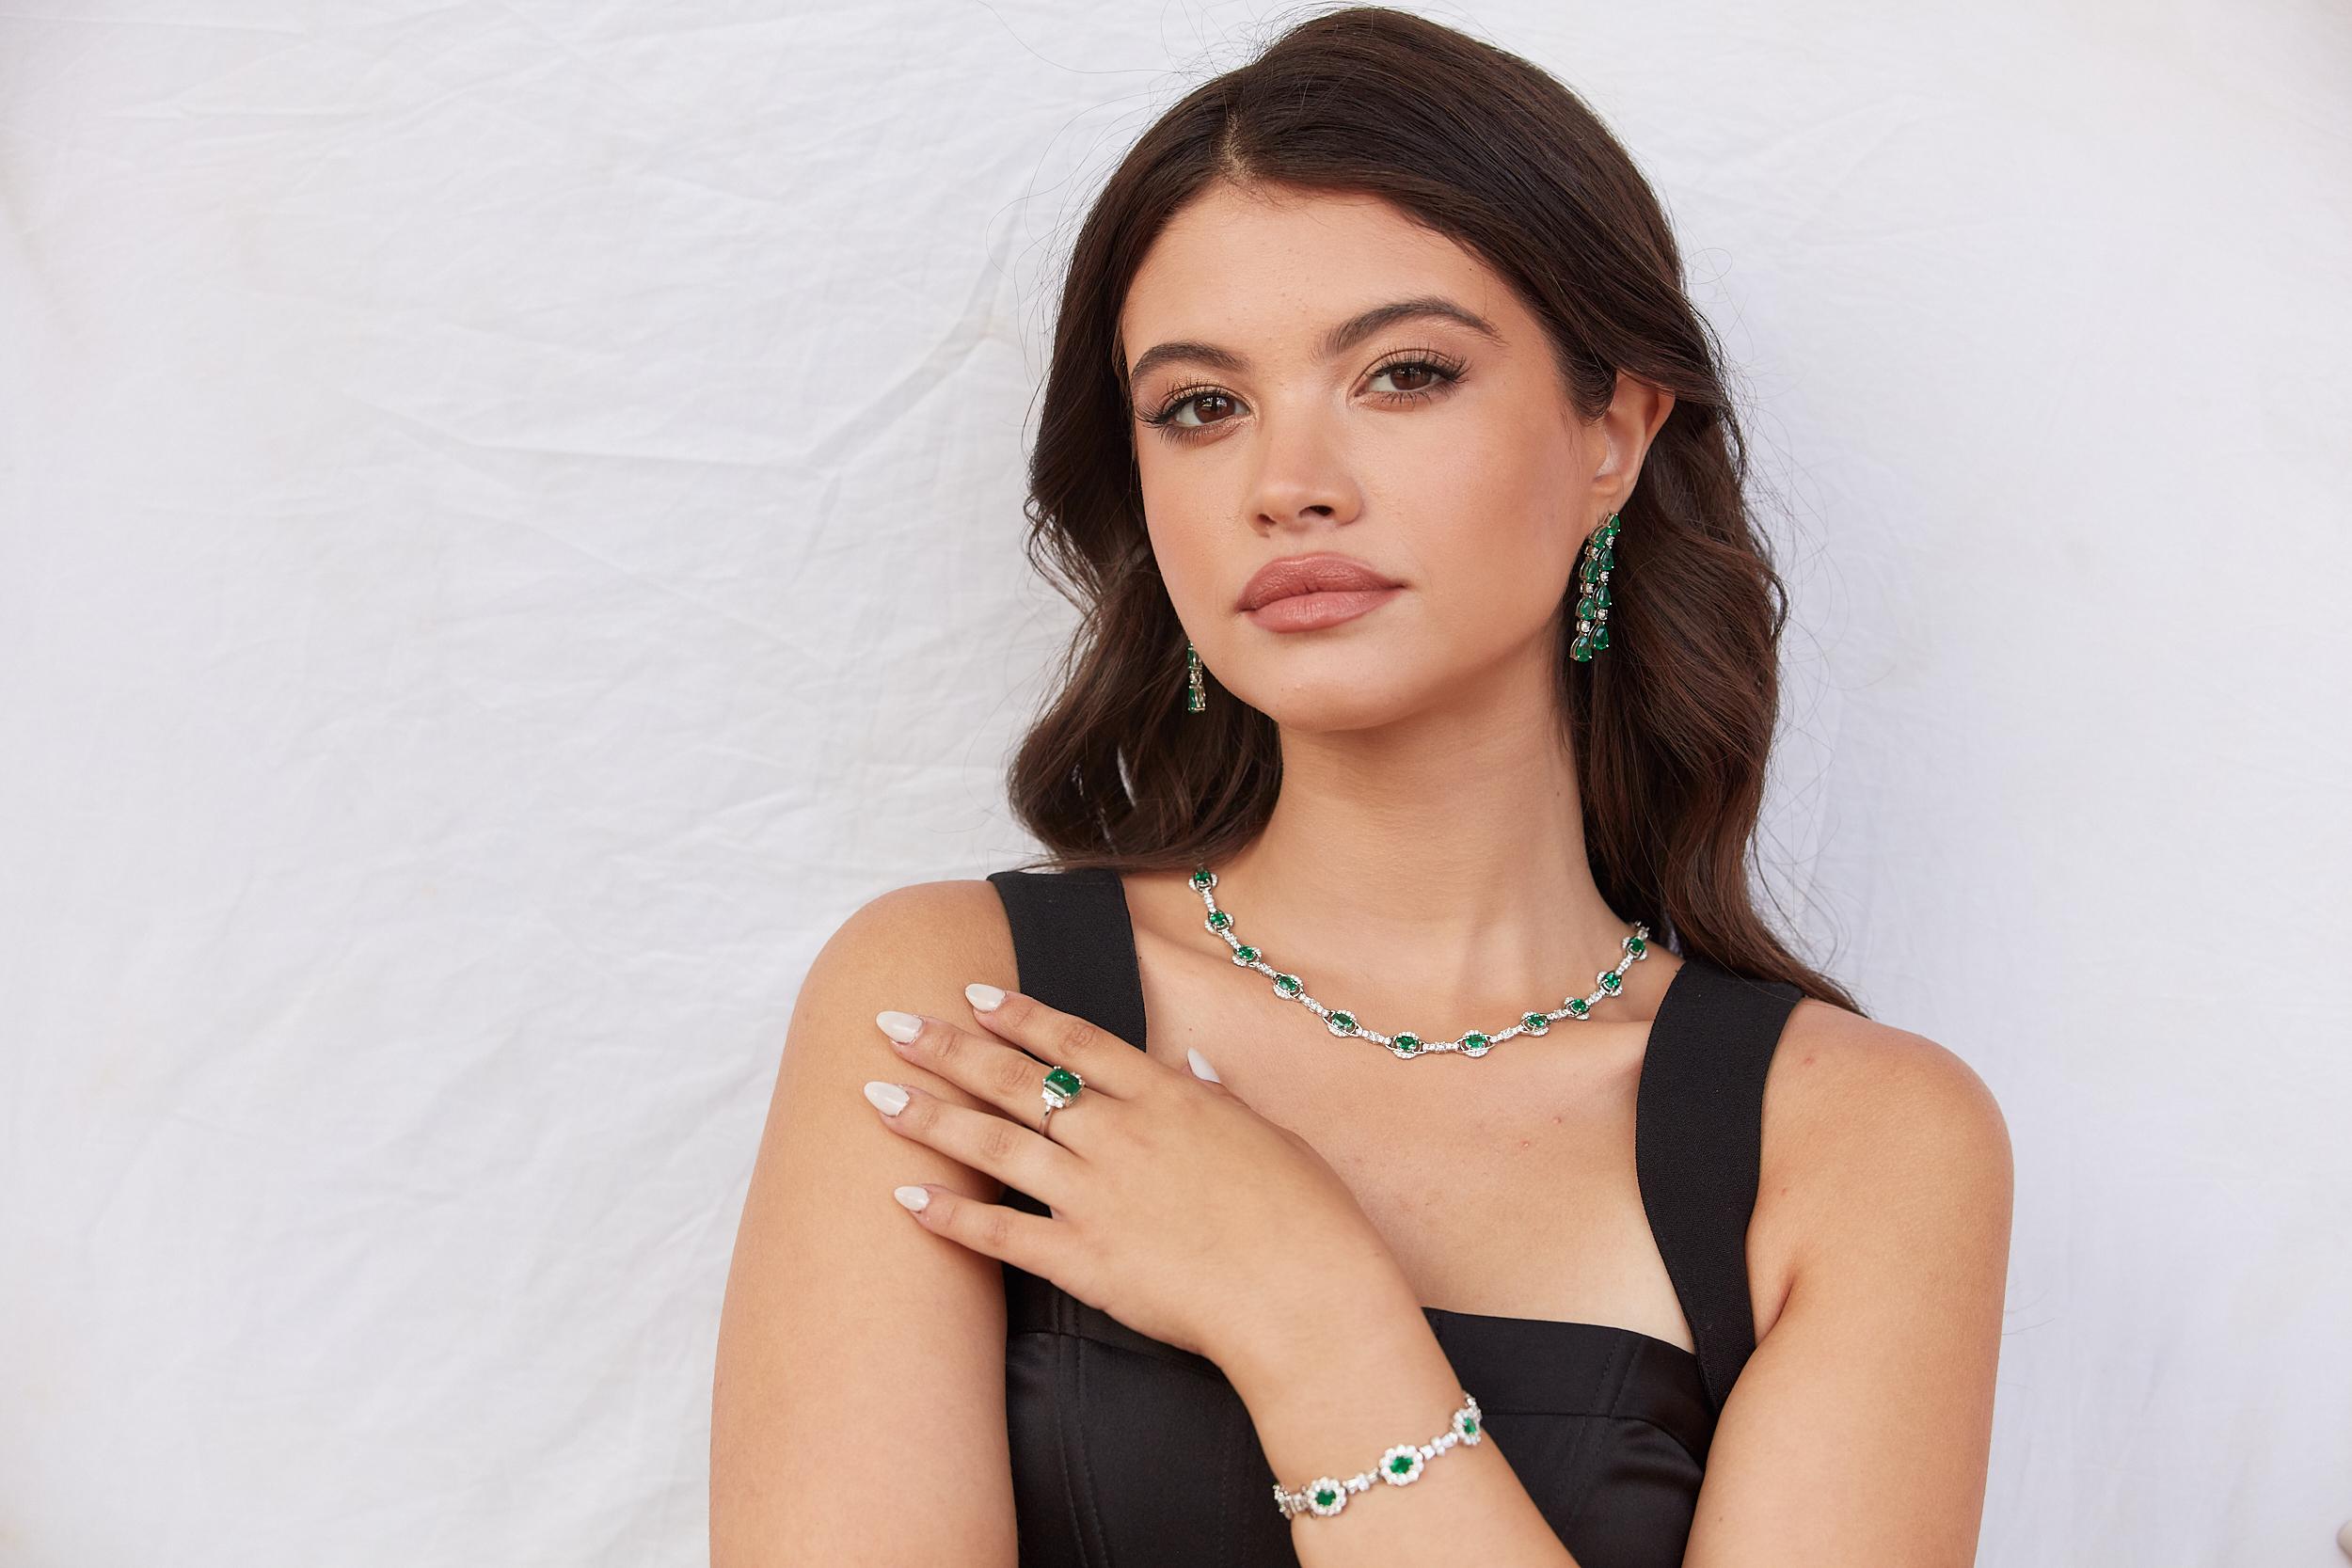 Tresor Beautiful Necklace feature 9.01 total carats of Emerald & 5.58 carats of Diamond. The Necklace is an ode to the luxurious yet classic beauty with sparkly gemstones and feminine hues. Their contemporary and modern design make them perfect and